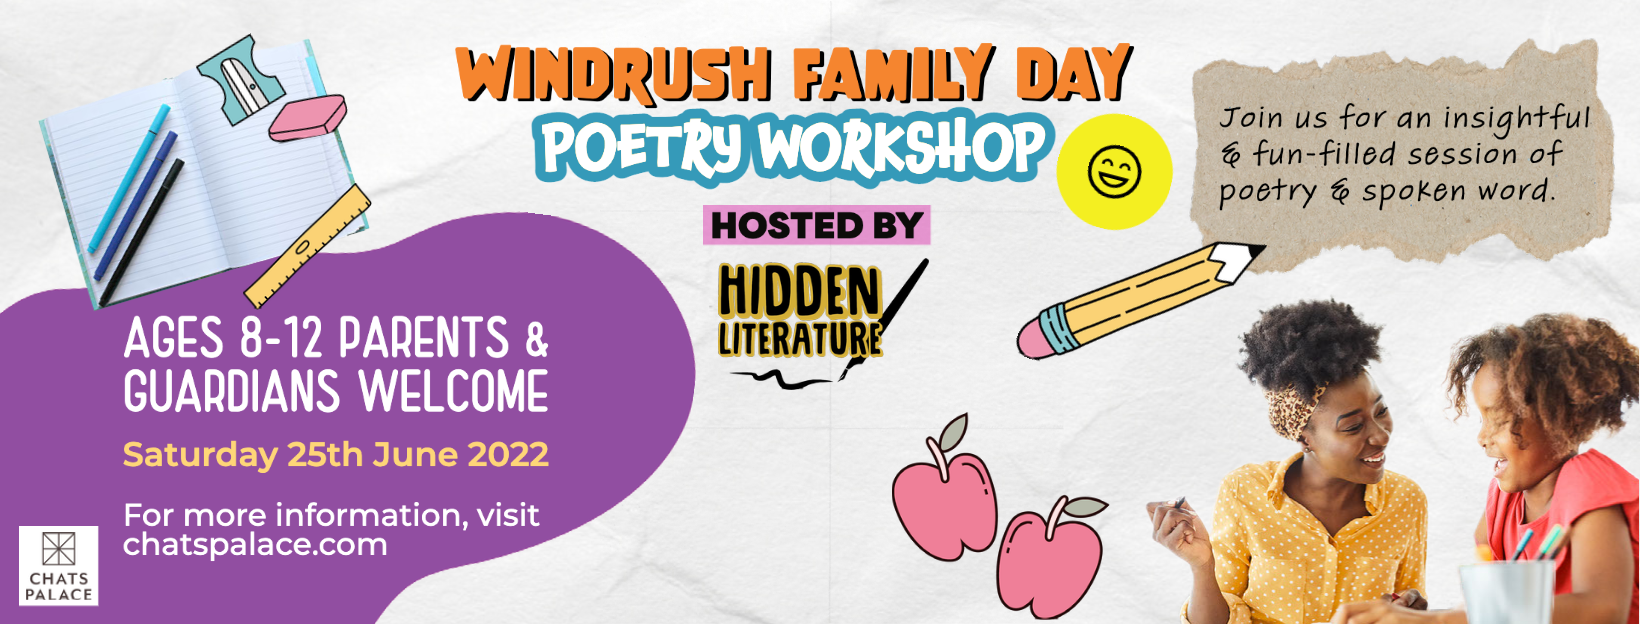 Hidden Literature Windrush Family Day Poetry Workshop 25.06.22